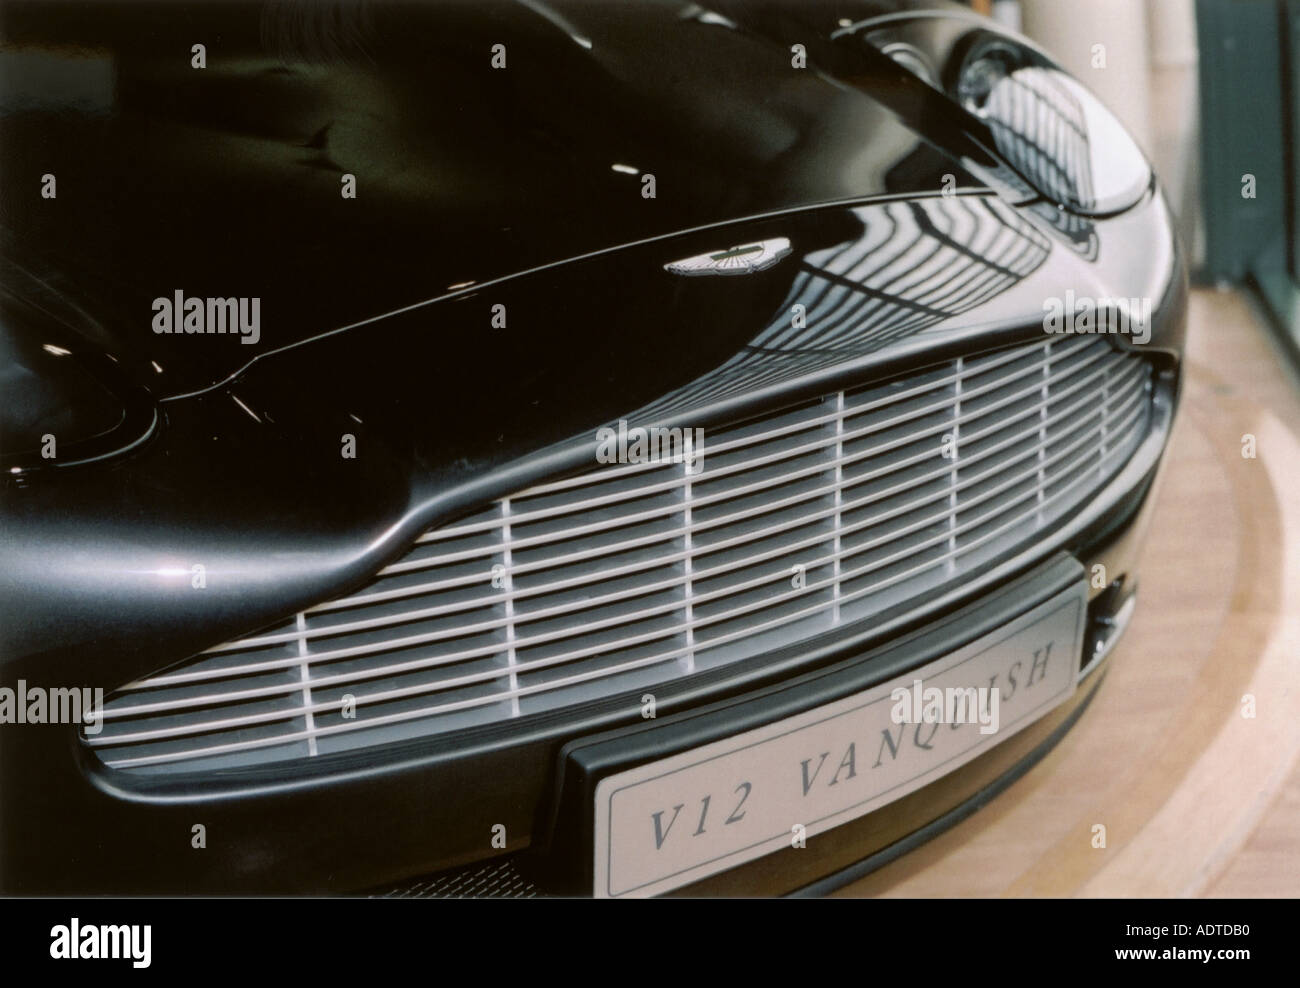 Aston Martin Vanquish radiator grille view from front Stock Photo - Alamy